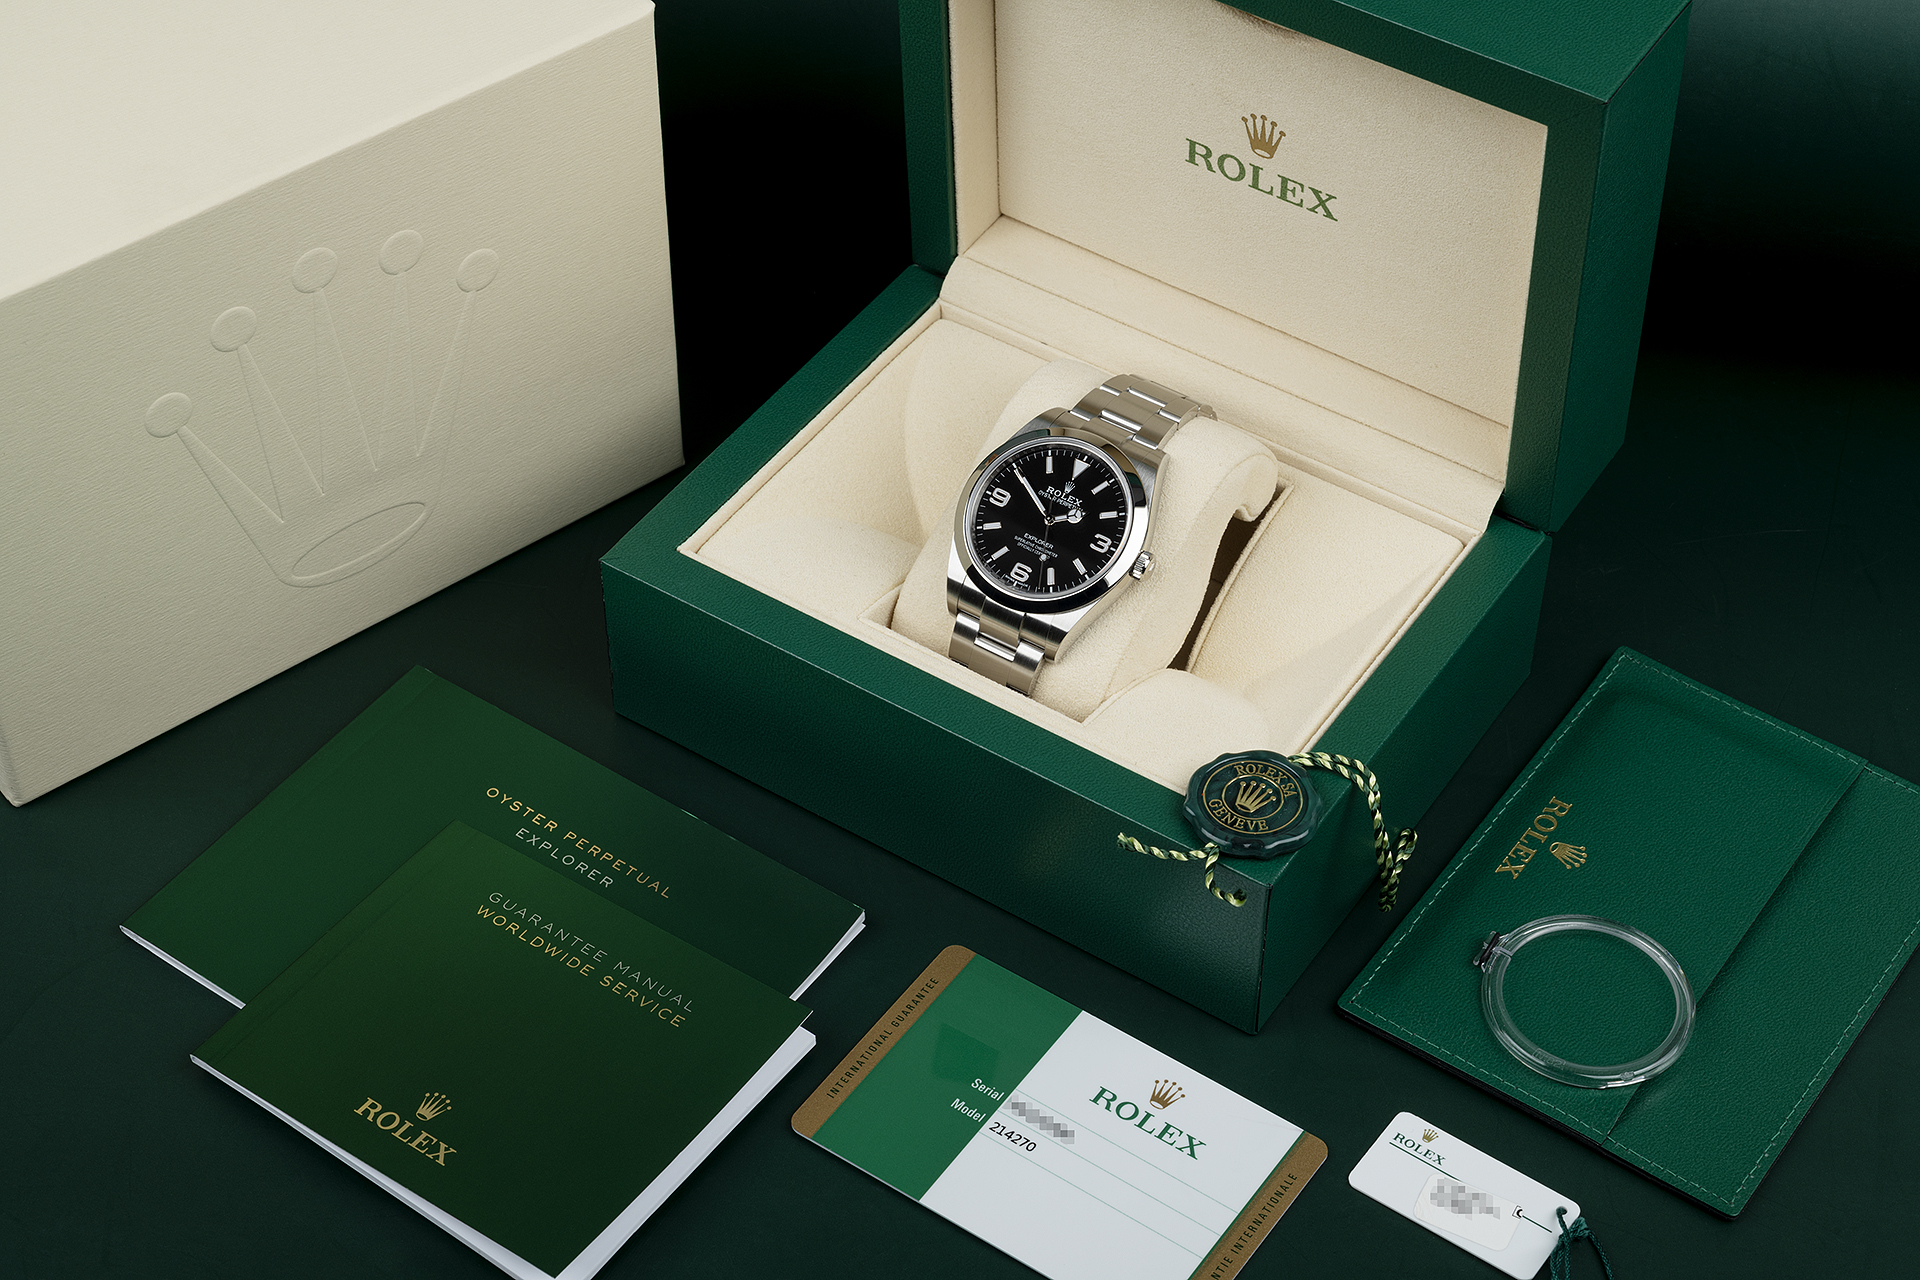 Rolex Explorer Watches | ref 214270 | 'Final Production' | The Watch Club